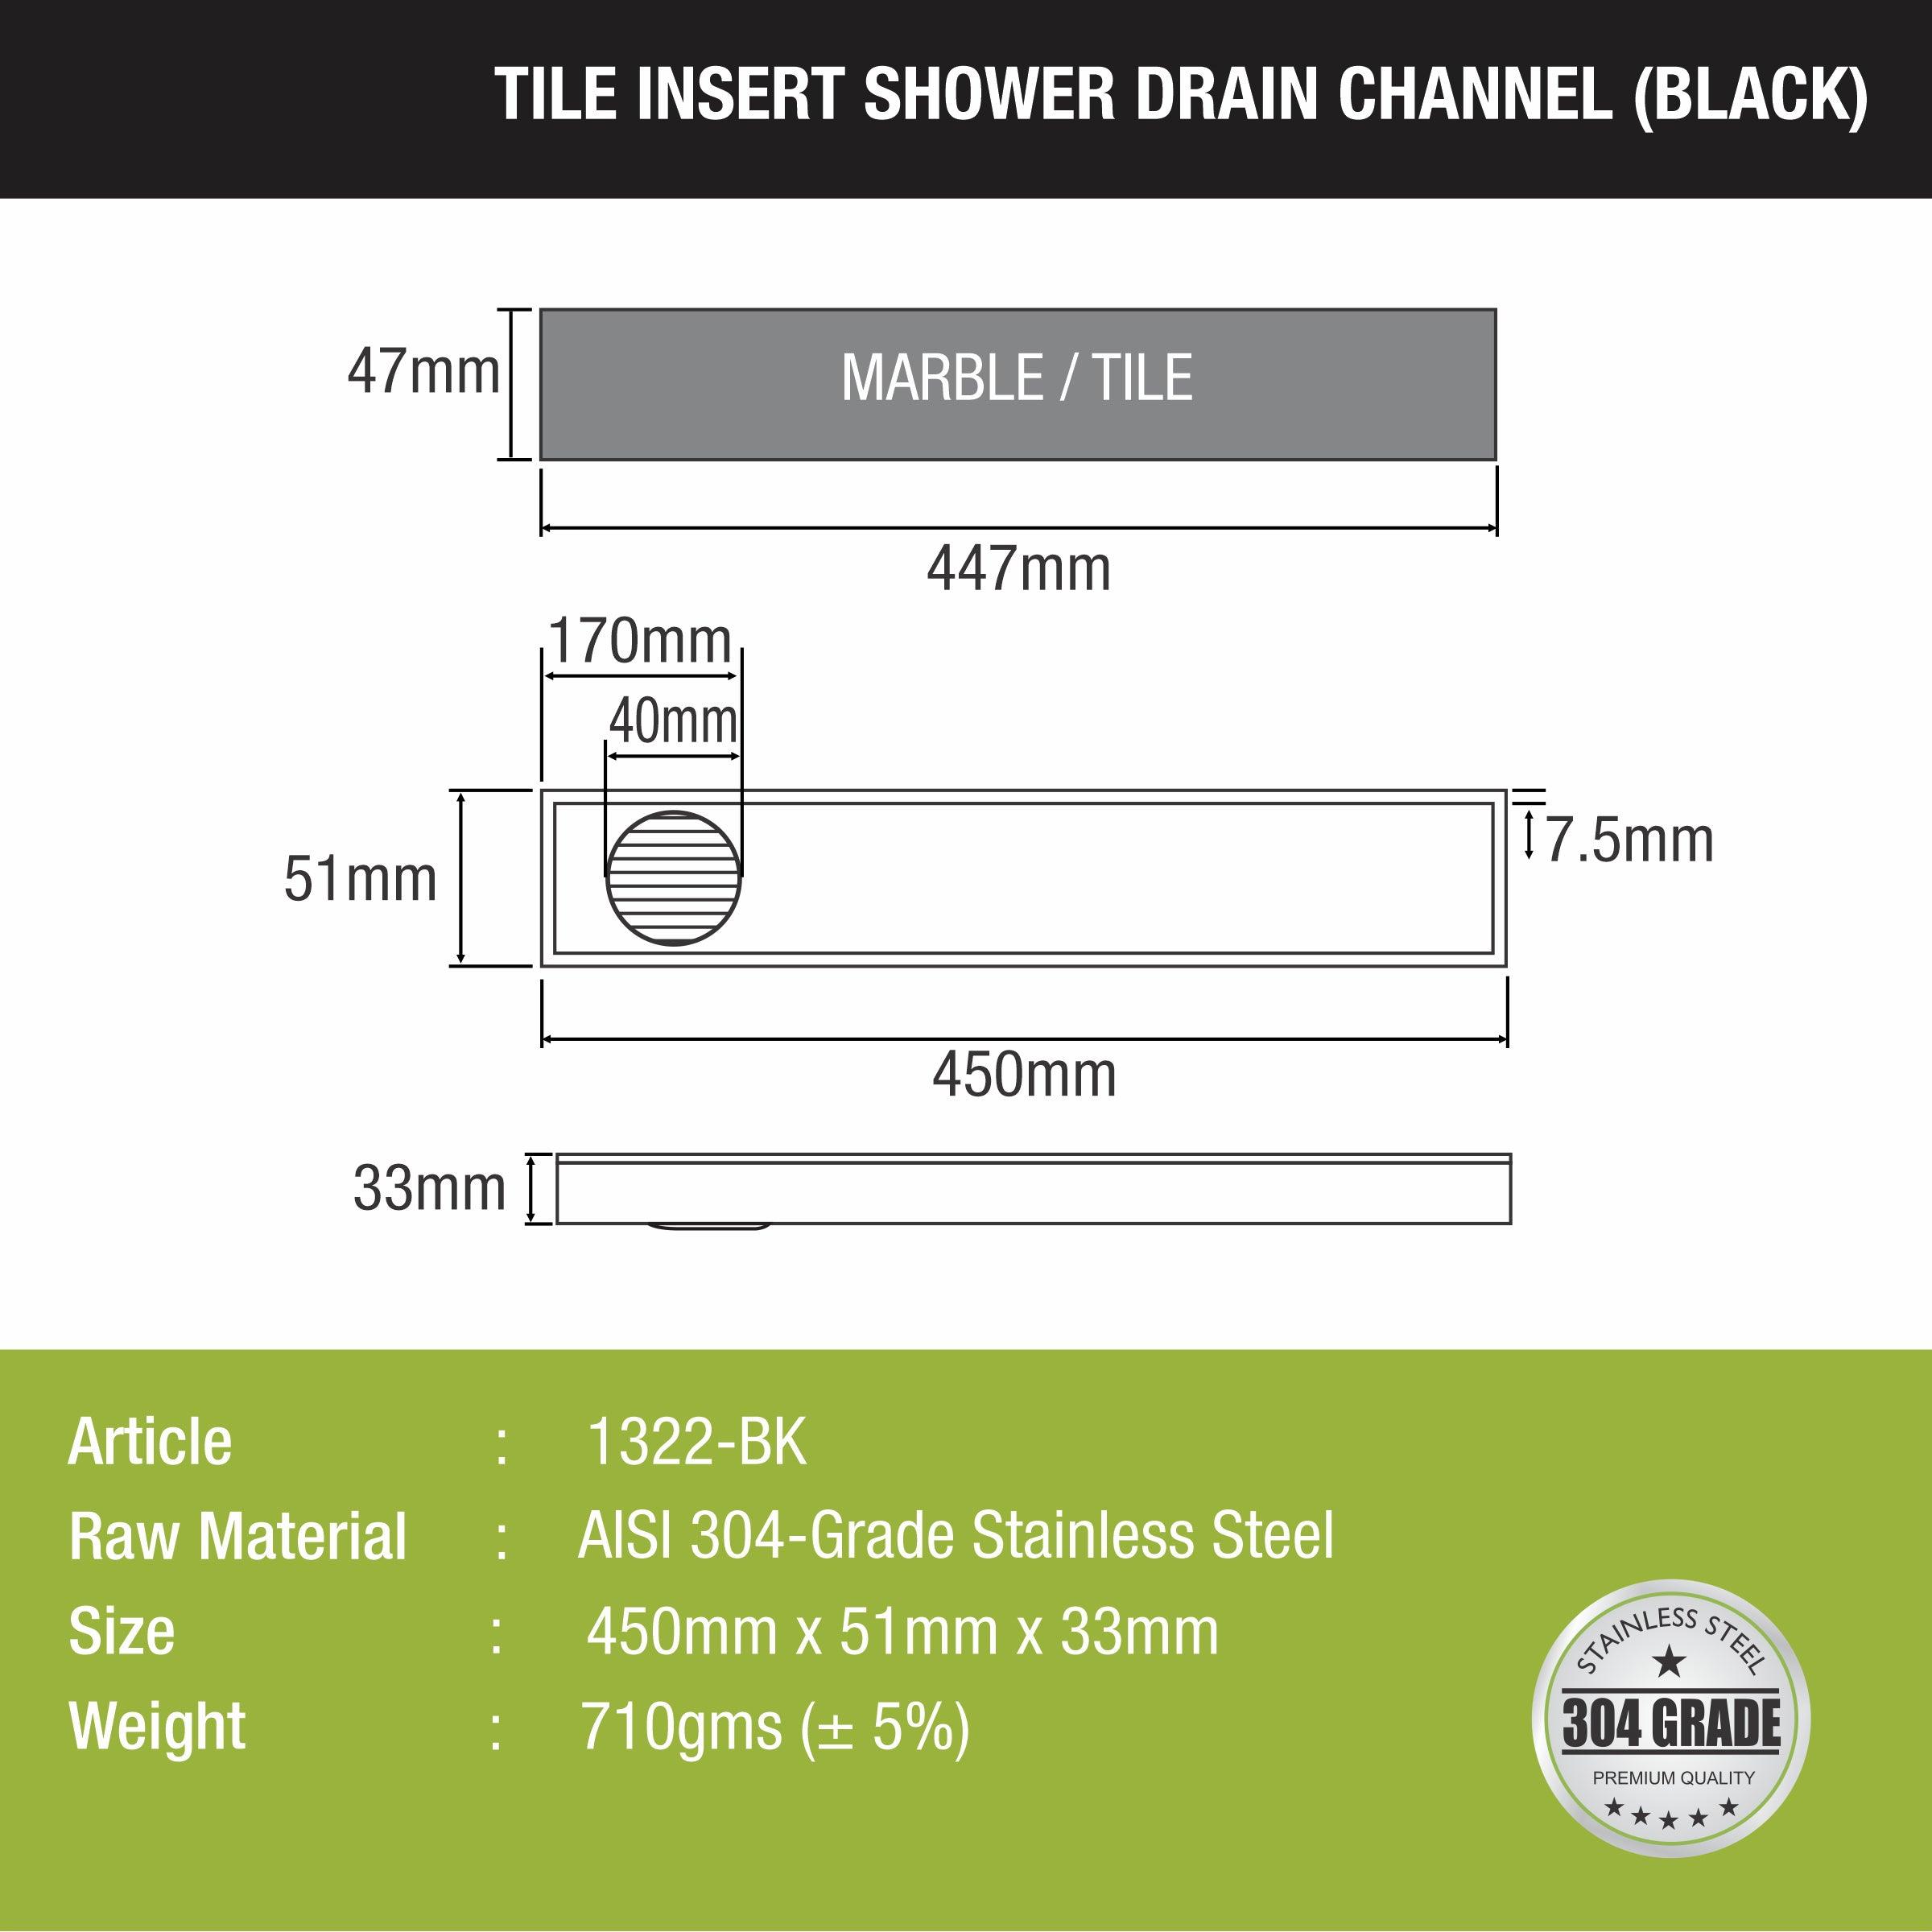 Tile Insert Shower Drain Channel - Black (18 x 2 Inches) size and details'